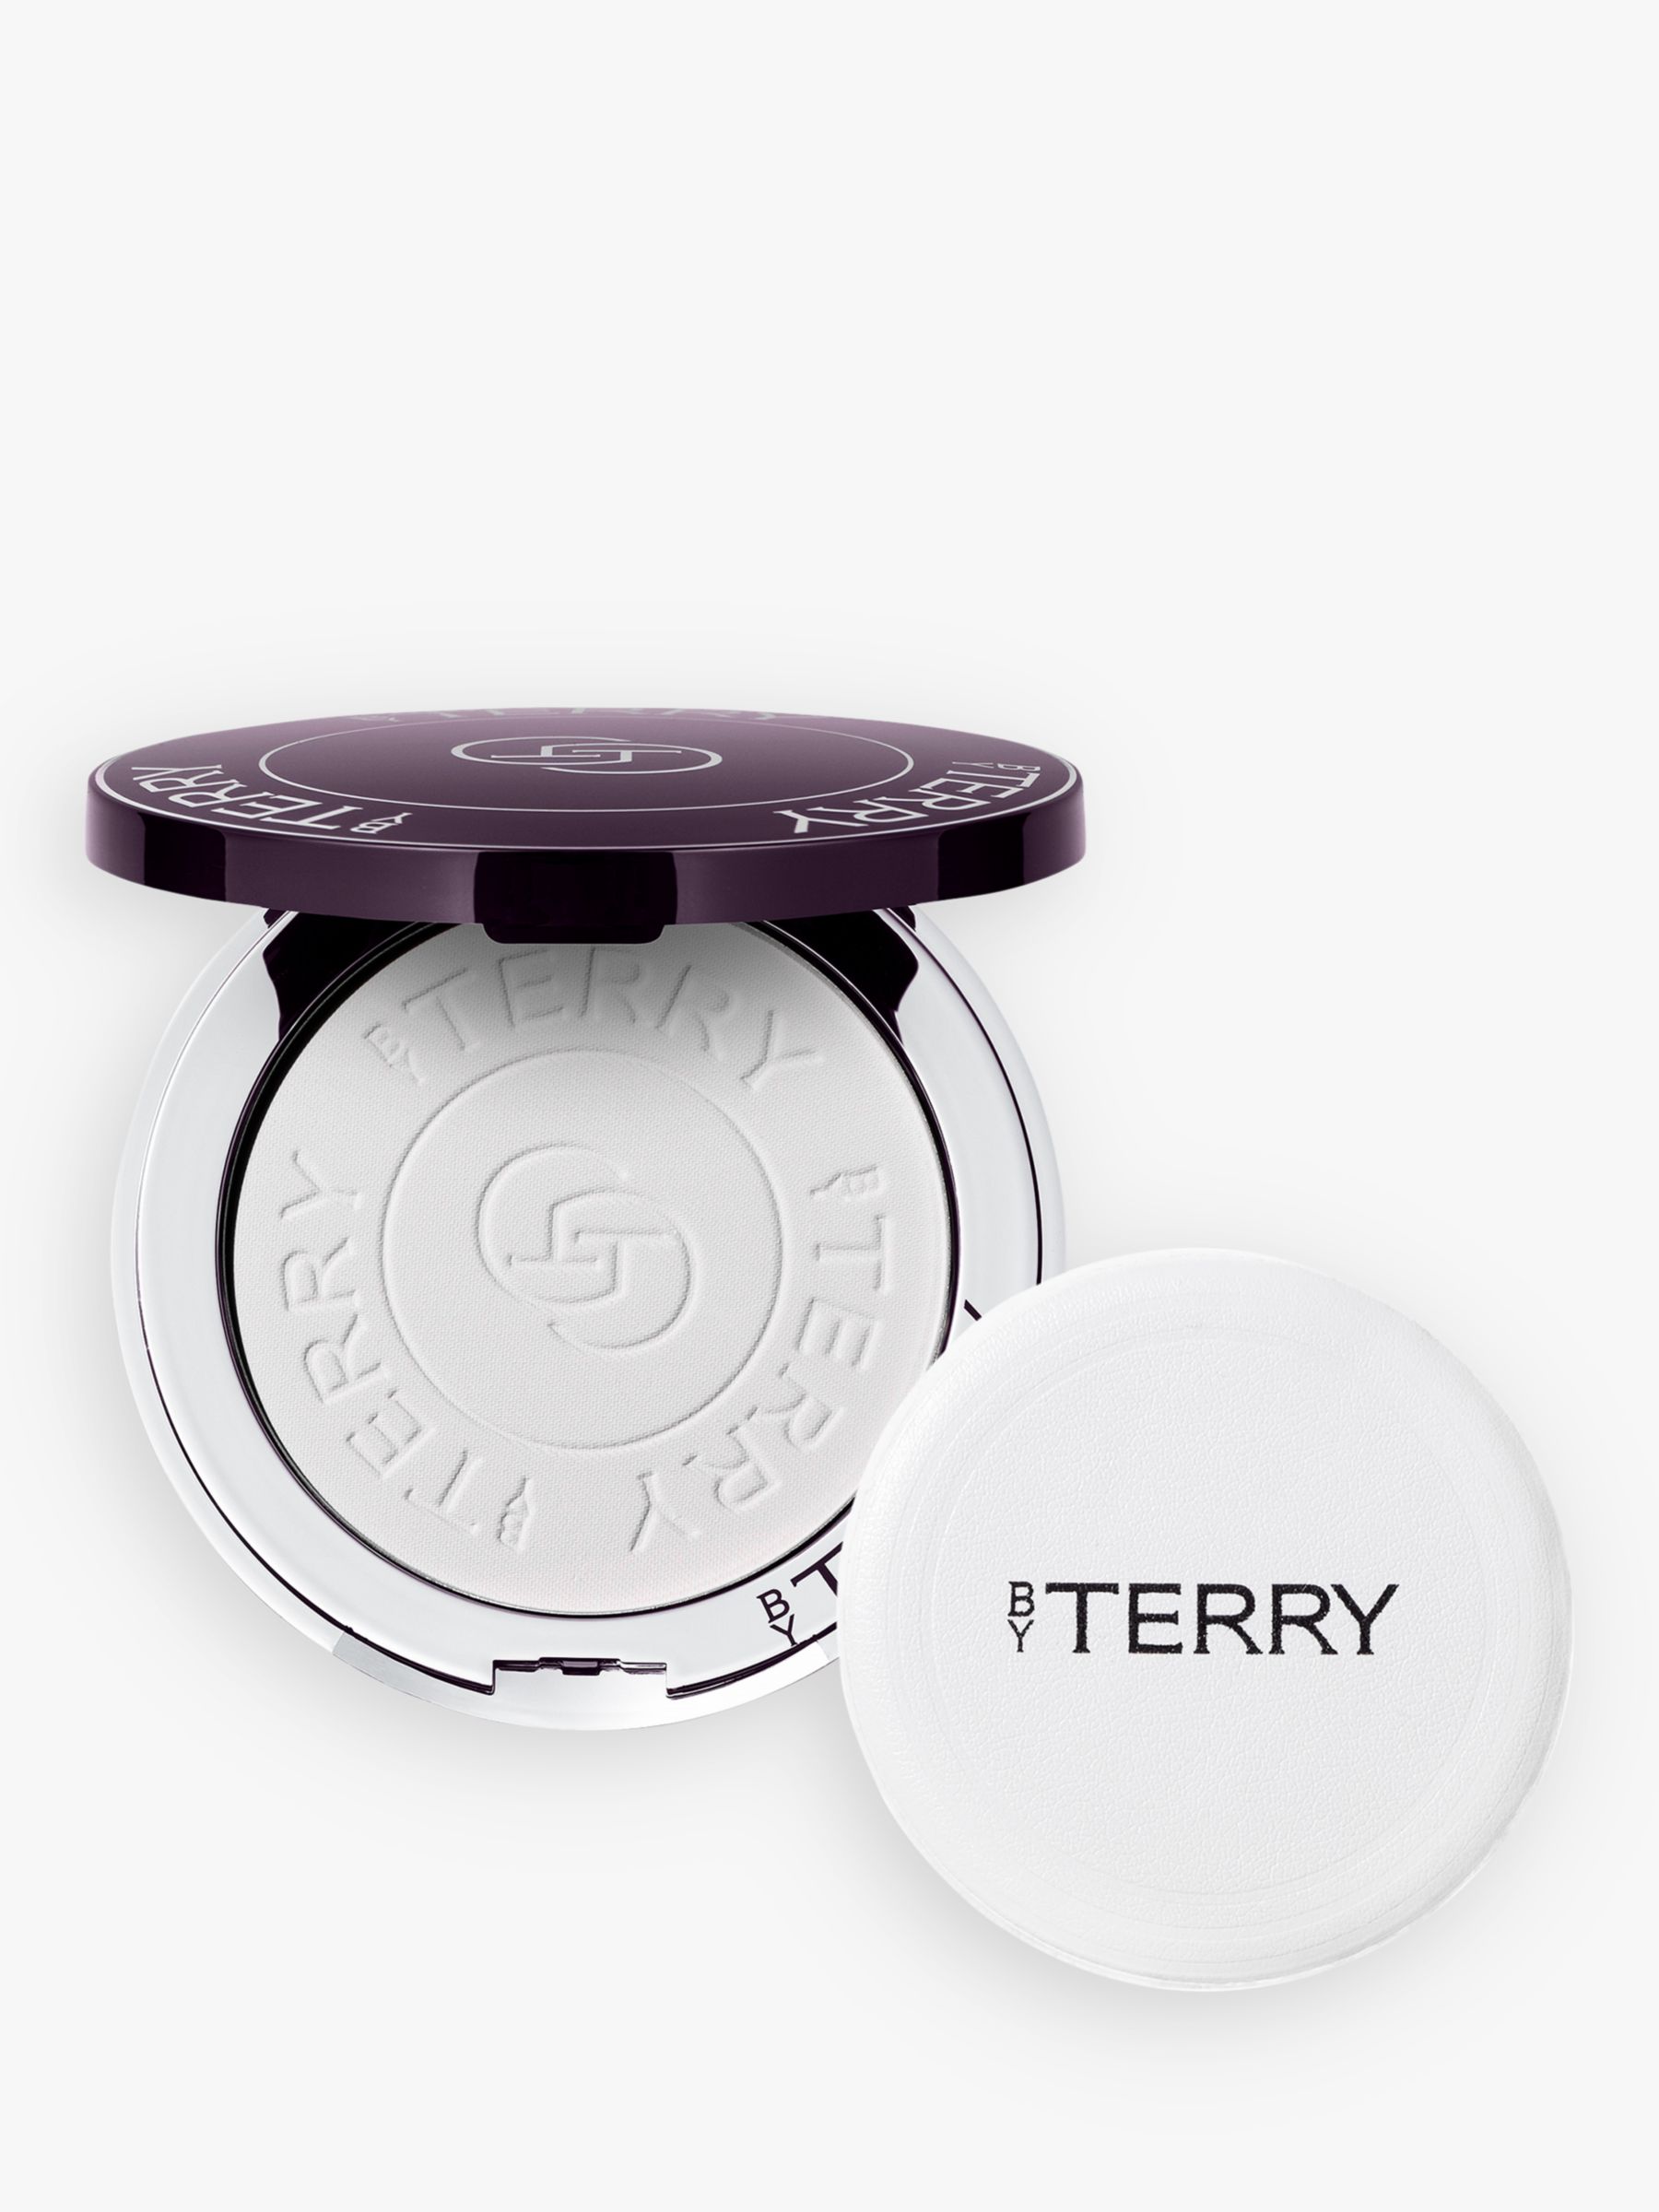 BY TERRY Hyaluronic Pressed Hydra-Powder, 7.5g 2